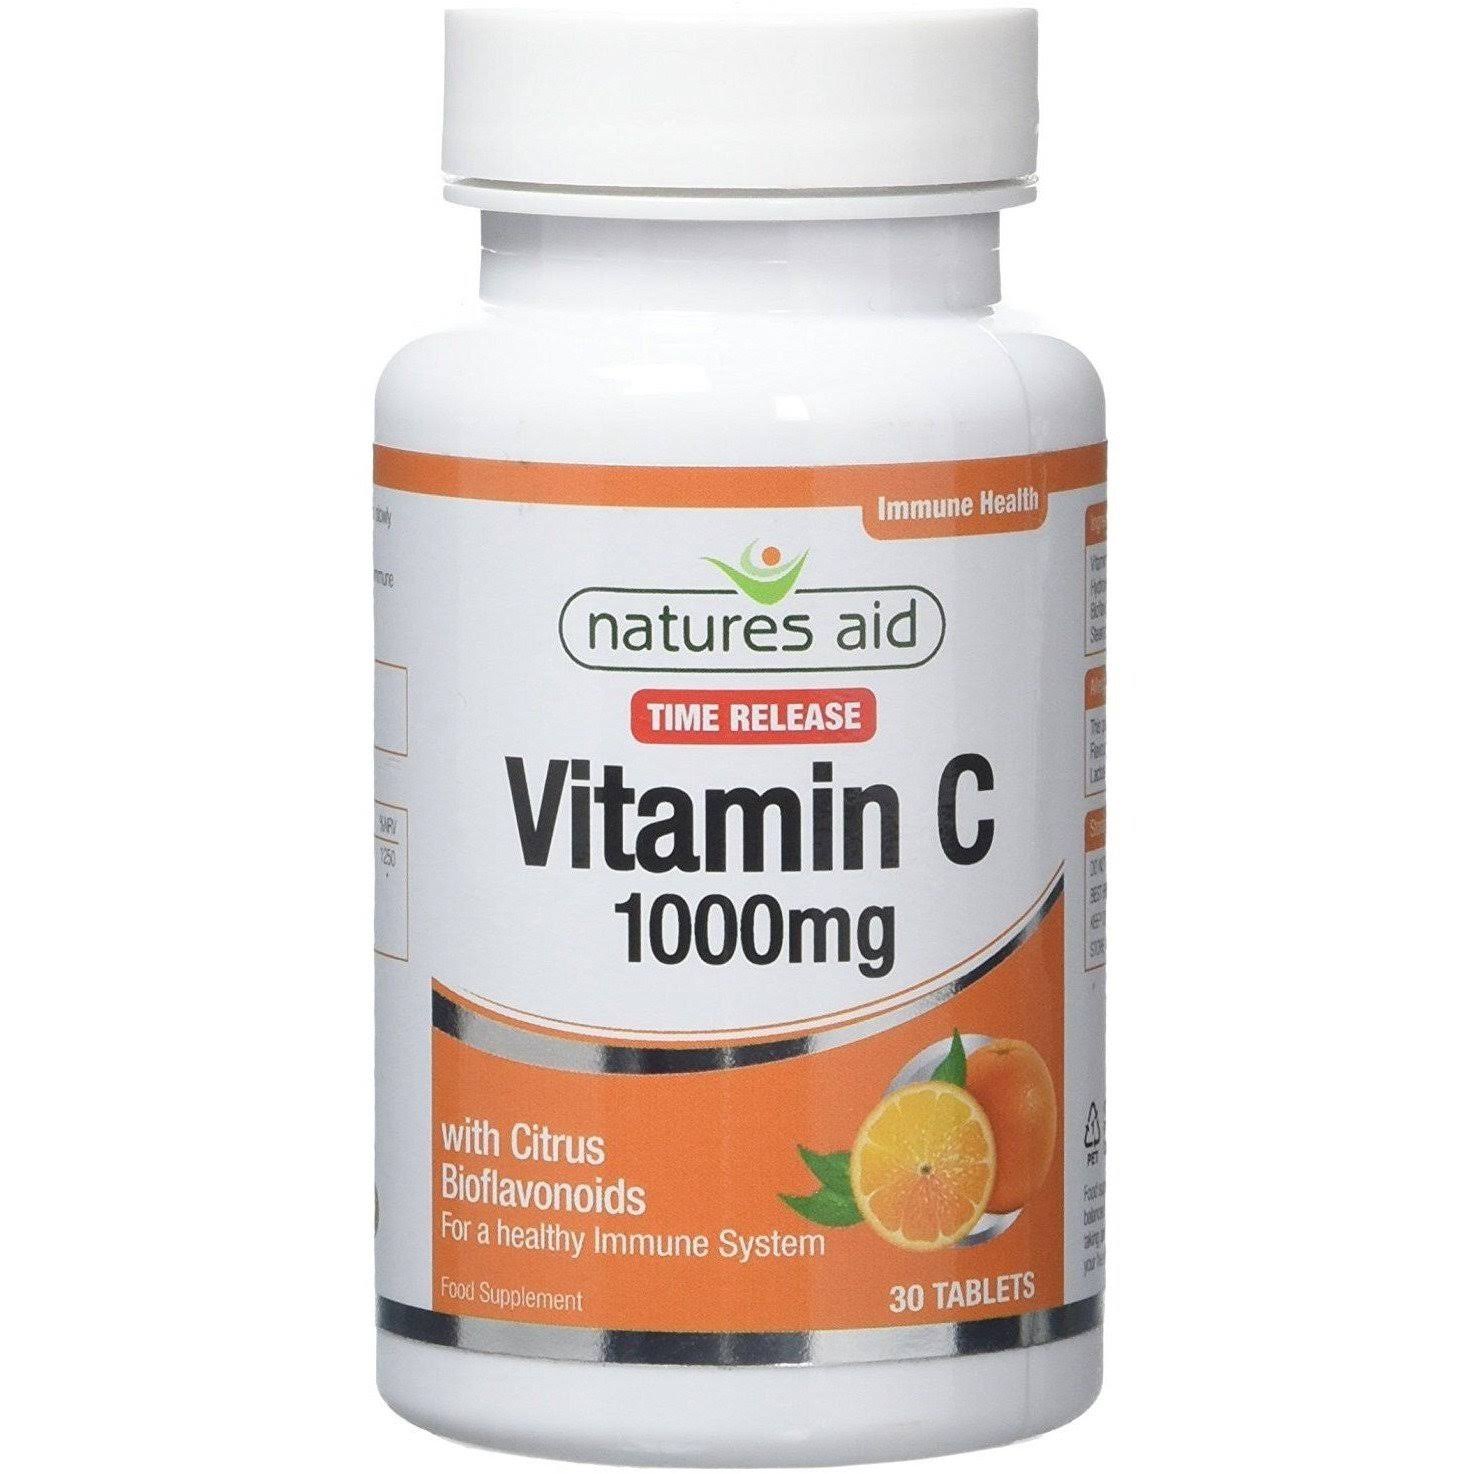 Natures Aid Time Release Vitamin C - 1000mg, 30 Tablets